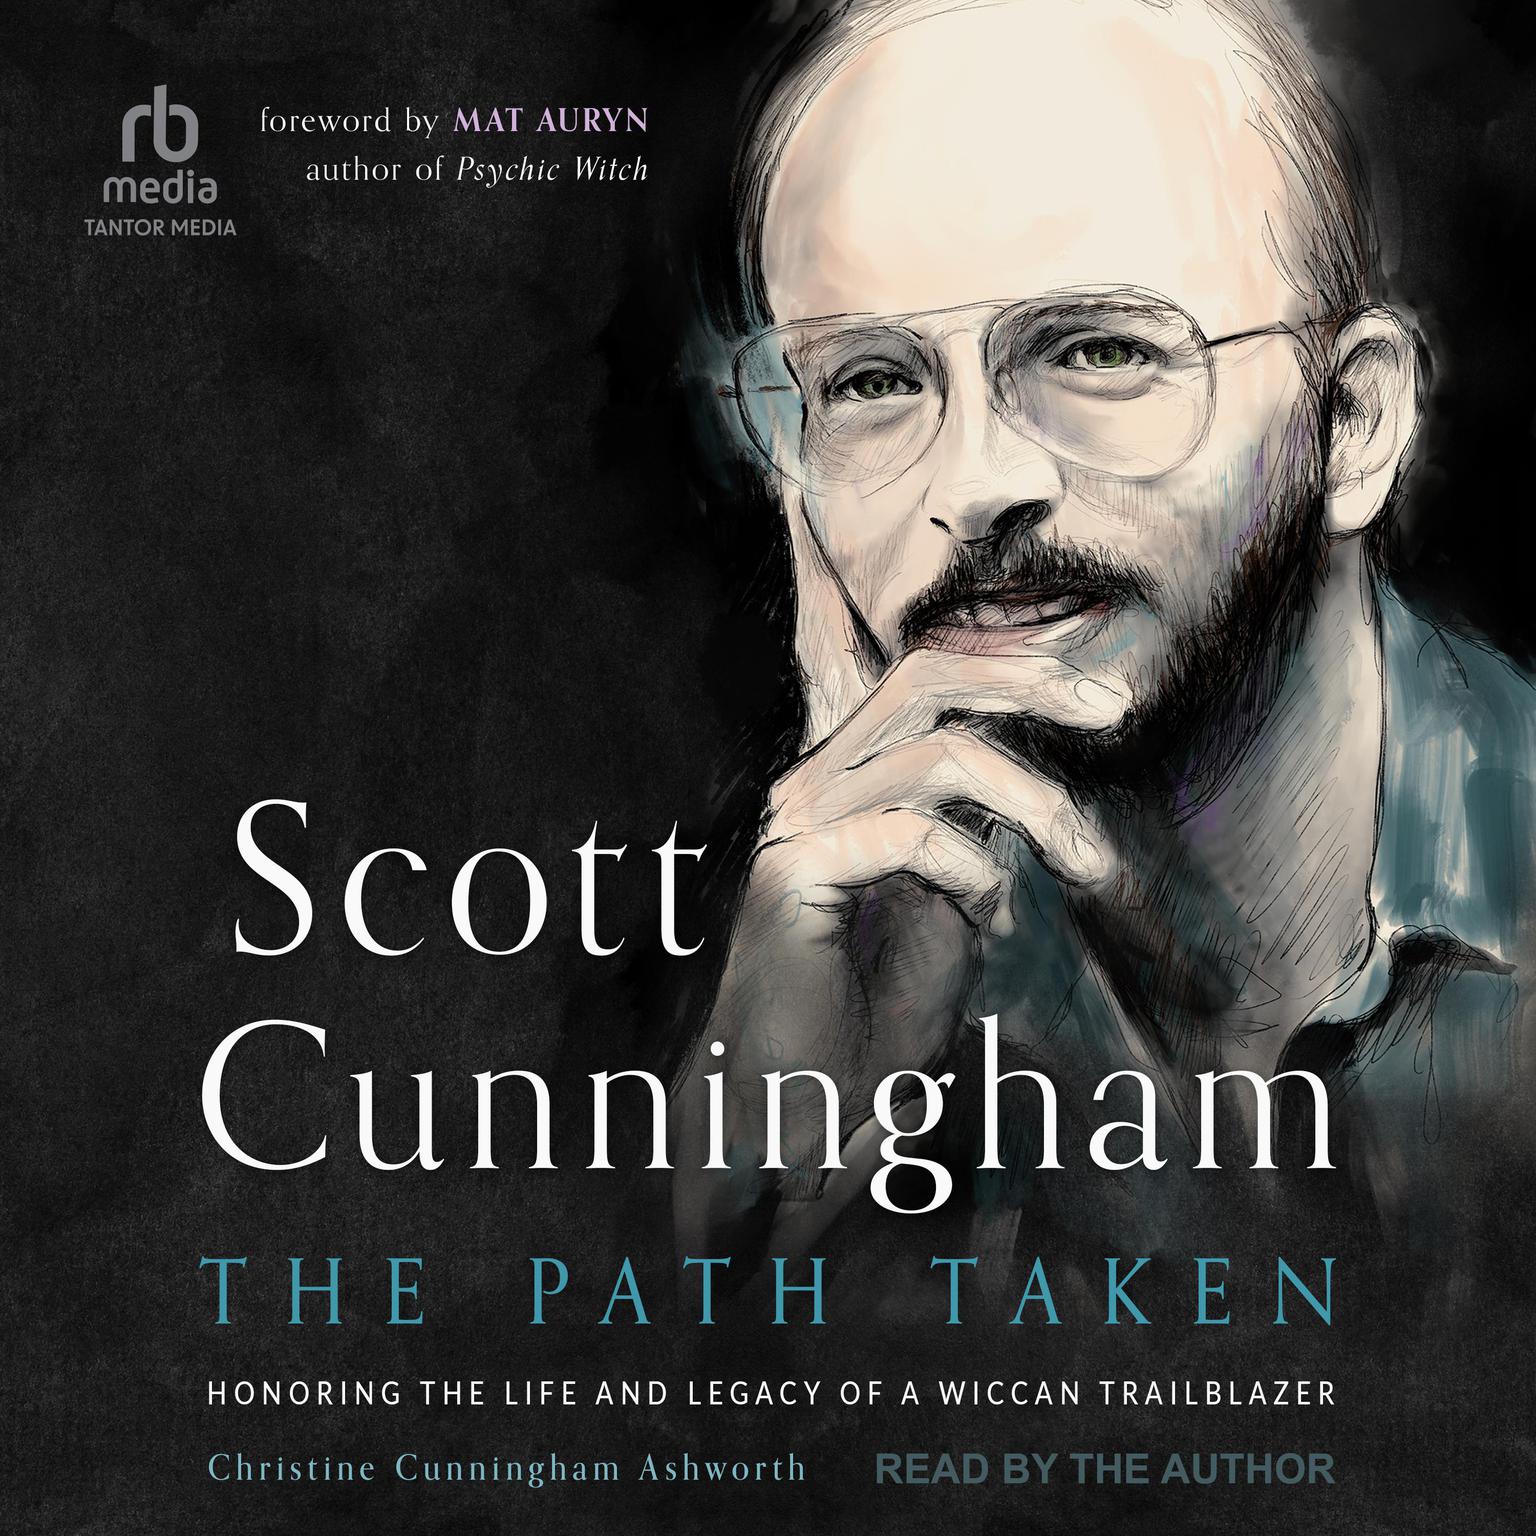 Scott Cunningham-The Path Taken: Honoring the Life and Legacy of a Wiccan Trailblazer Audiobook, by Christie Cunningham Ashworth